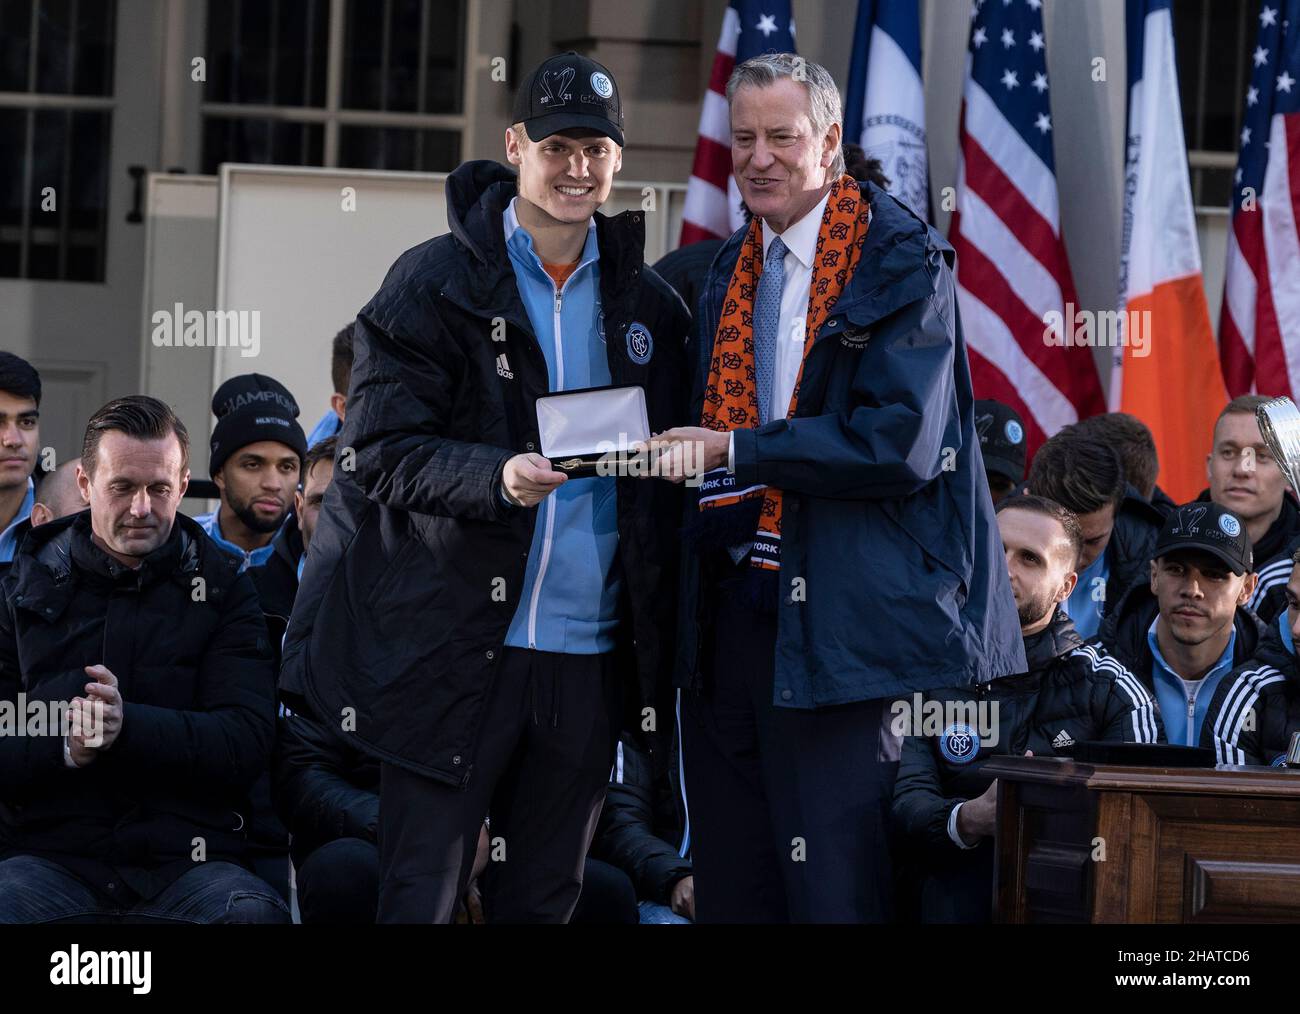 New York, USA. 14th Dec, 2021. Midfielder Keaton Parks received Keys to the City from mayor Bill de Blasio during celebration for NYCFC winning the 2021 MLS Cup on City Hall steps in New York on December 14, 2021. NYCFC finished the regular season in 4th place and played almost all playoff games away. Winning the MLS Cup is the first trophy won by the franchise since it was established 7 years ago. NYCFC is part of the City Football Group which owns football clubs around the world. (Photo by Lev Radin/Sipa USA) Credit: Sipa USA/Alamy Live News Stock Photo